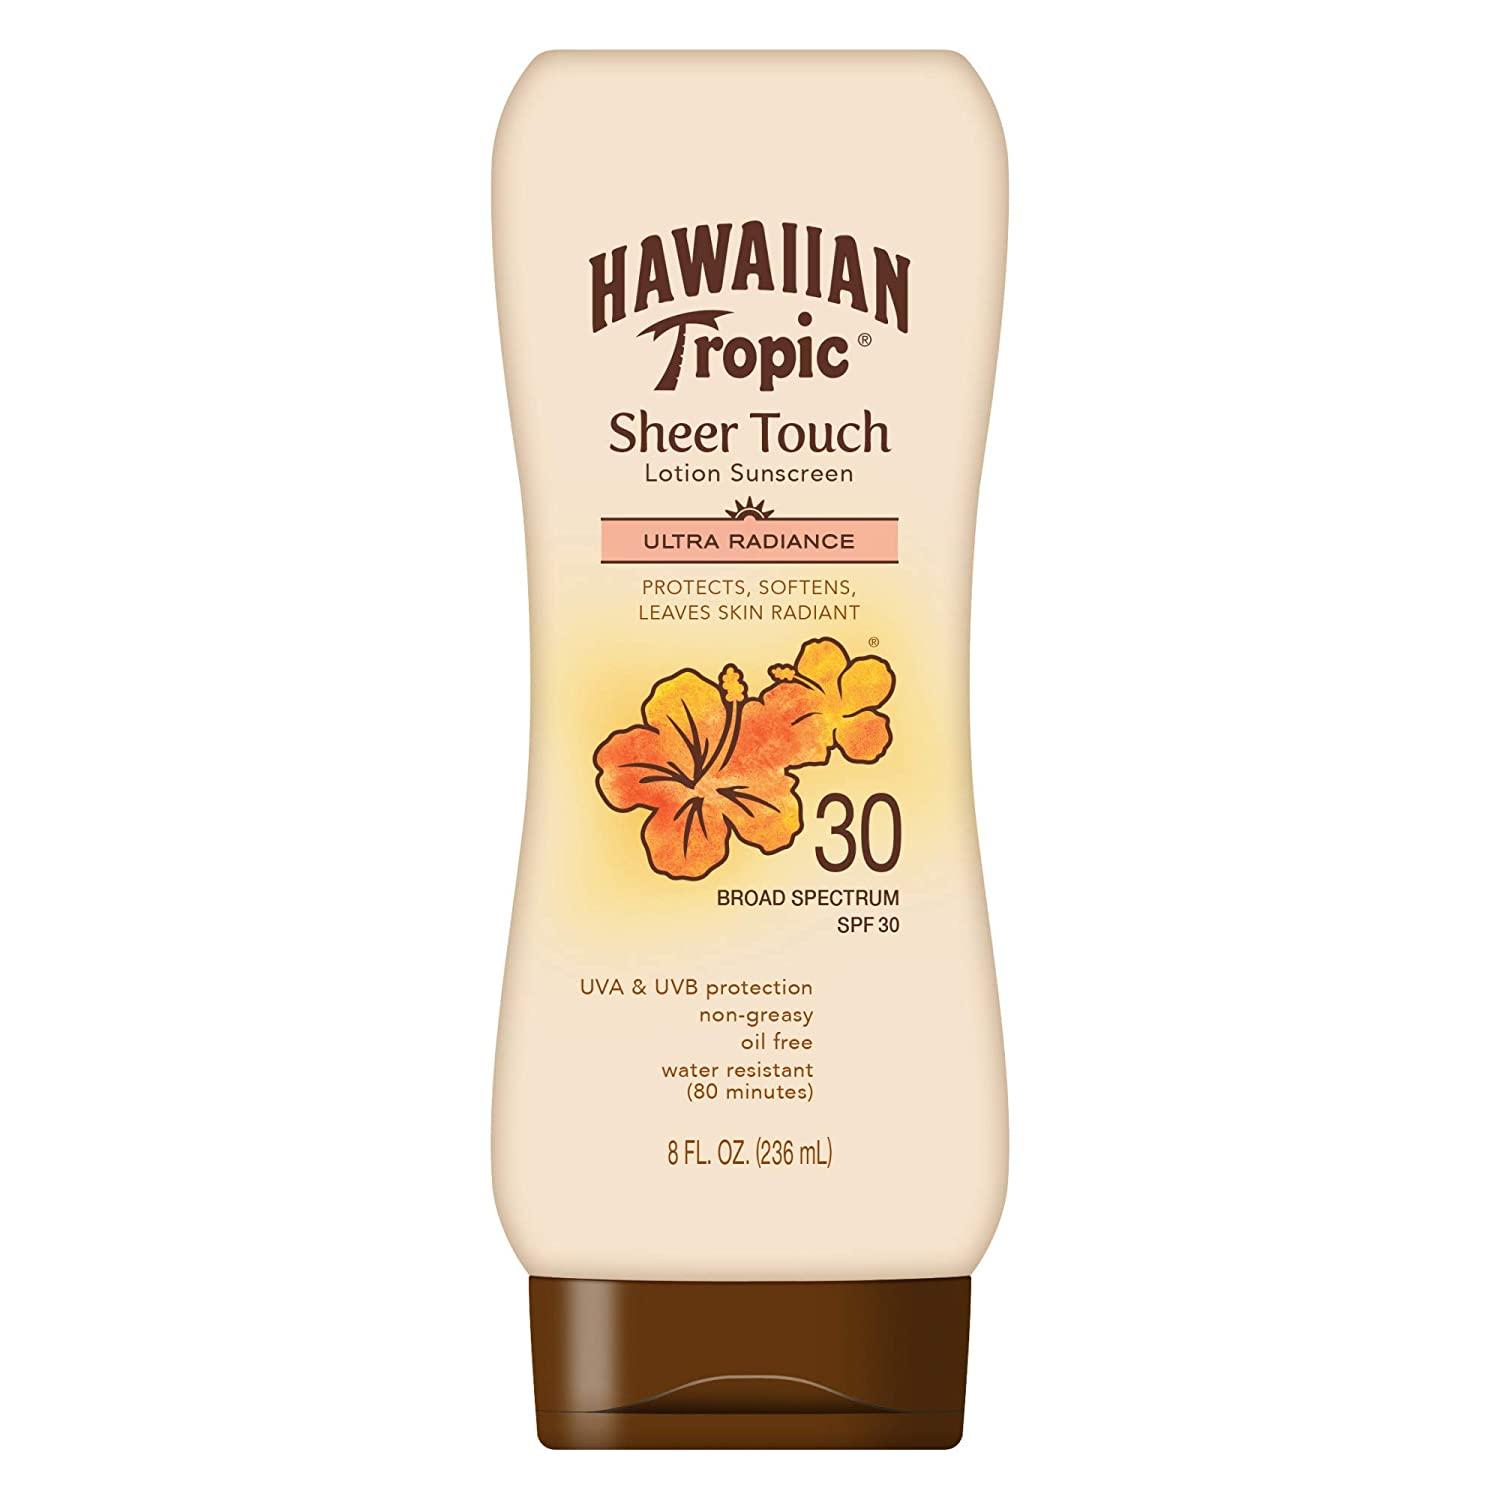 Sheer Touch Sunscreen Lotion SPF 30